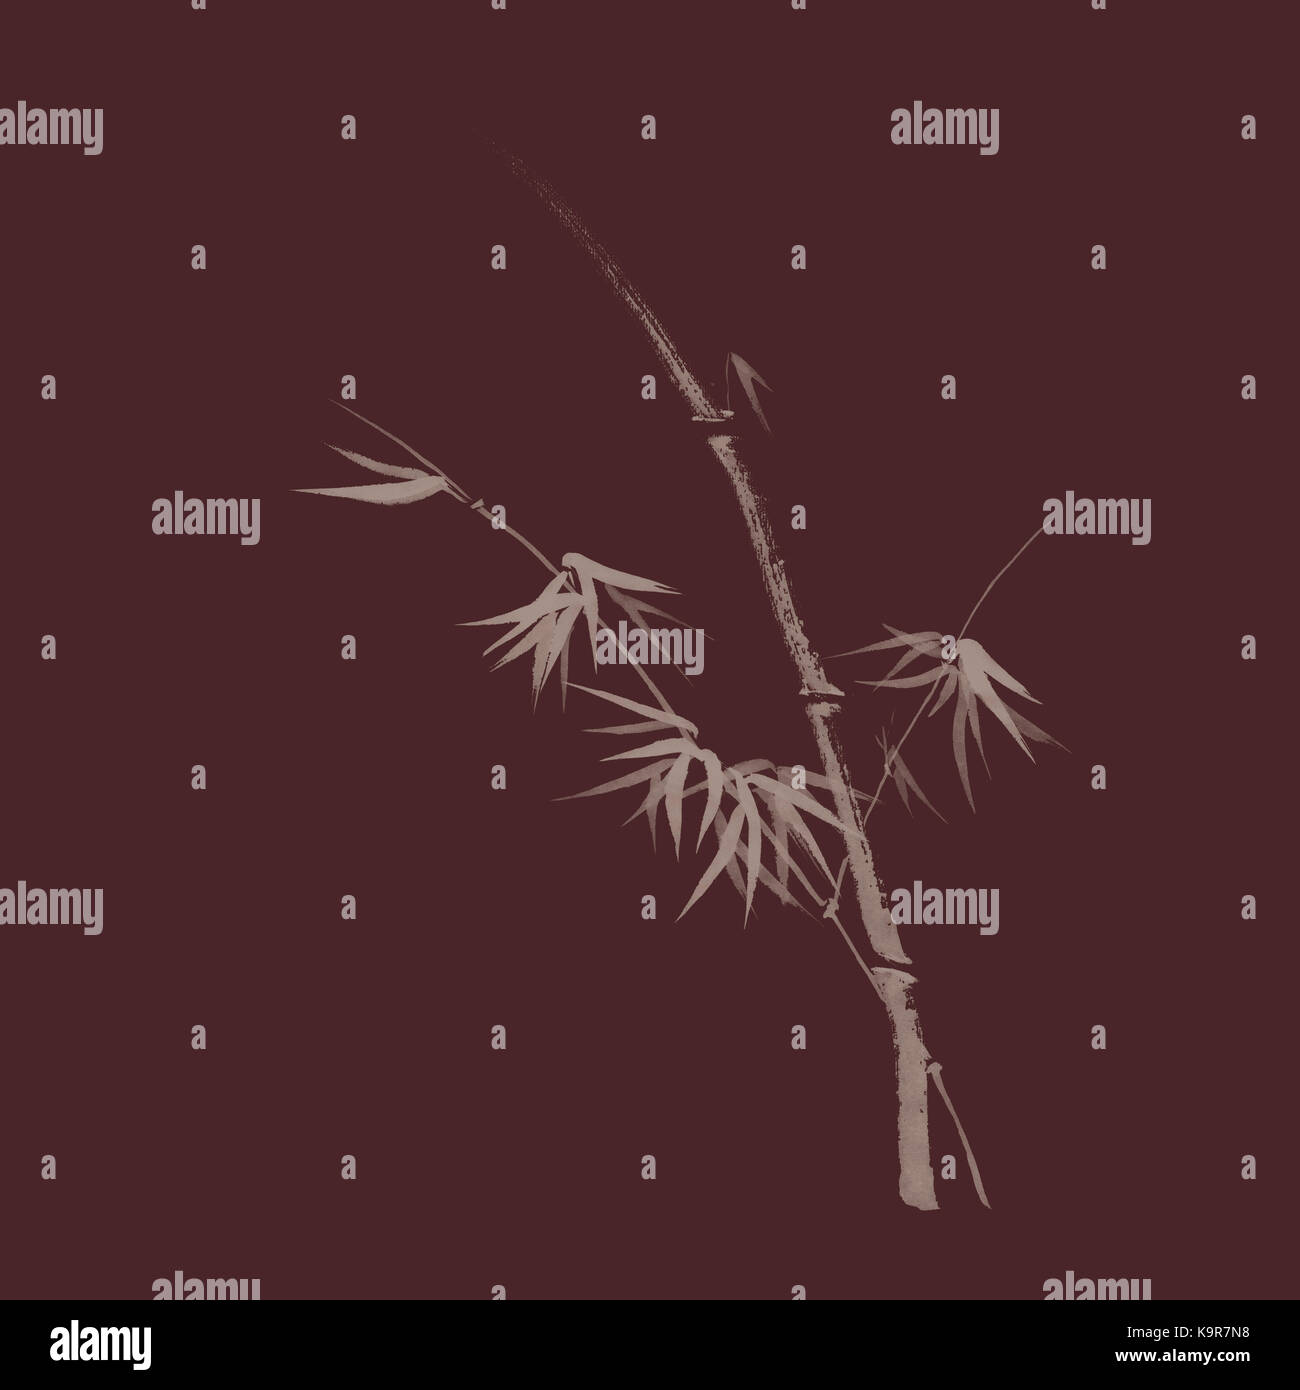 Exquisite artistic design in oriental Japanese Zen ink painting style of bamboo stalk with young leaves, illustration on dark red burgundy background Stock Photo